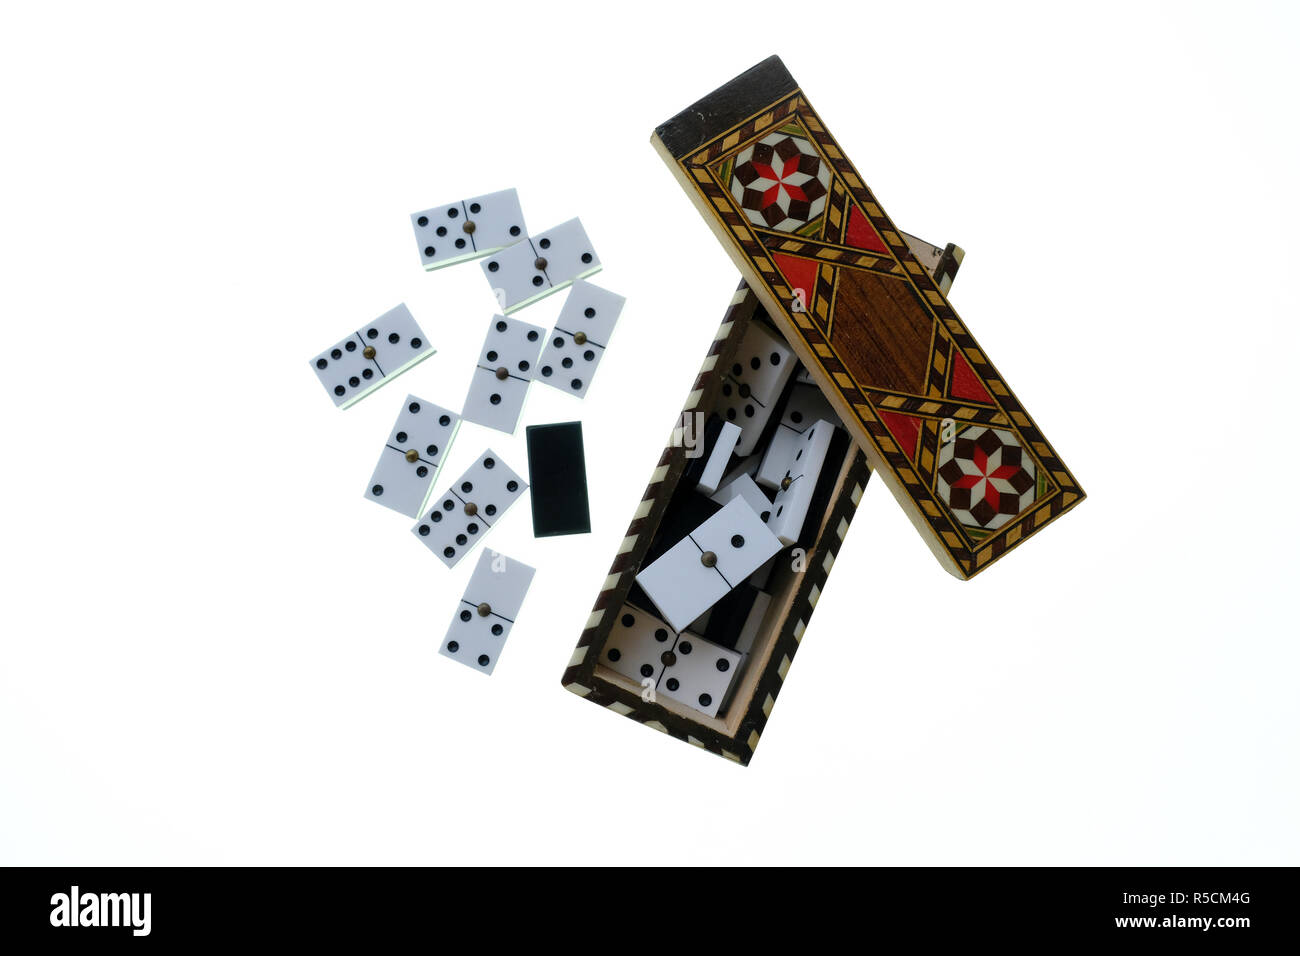 Small wooden marquetry box with sliding lid containing a set of small white dominoes with black dots. All against a white background Stock Photo